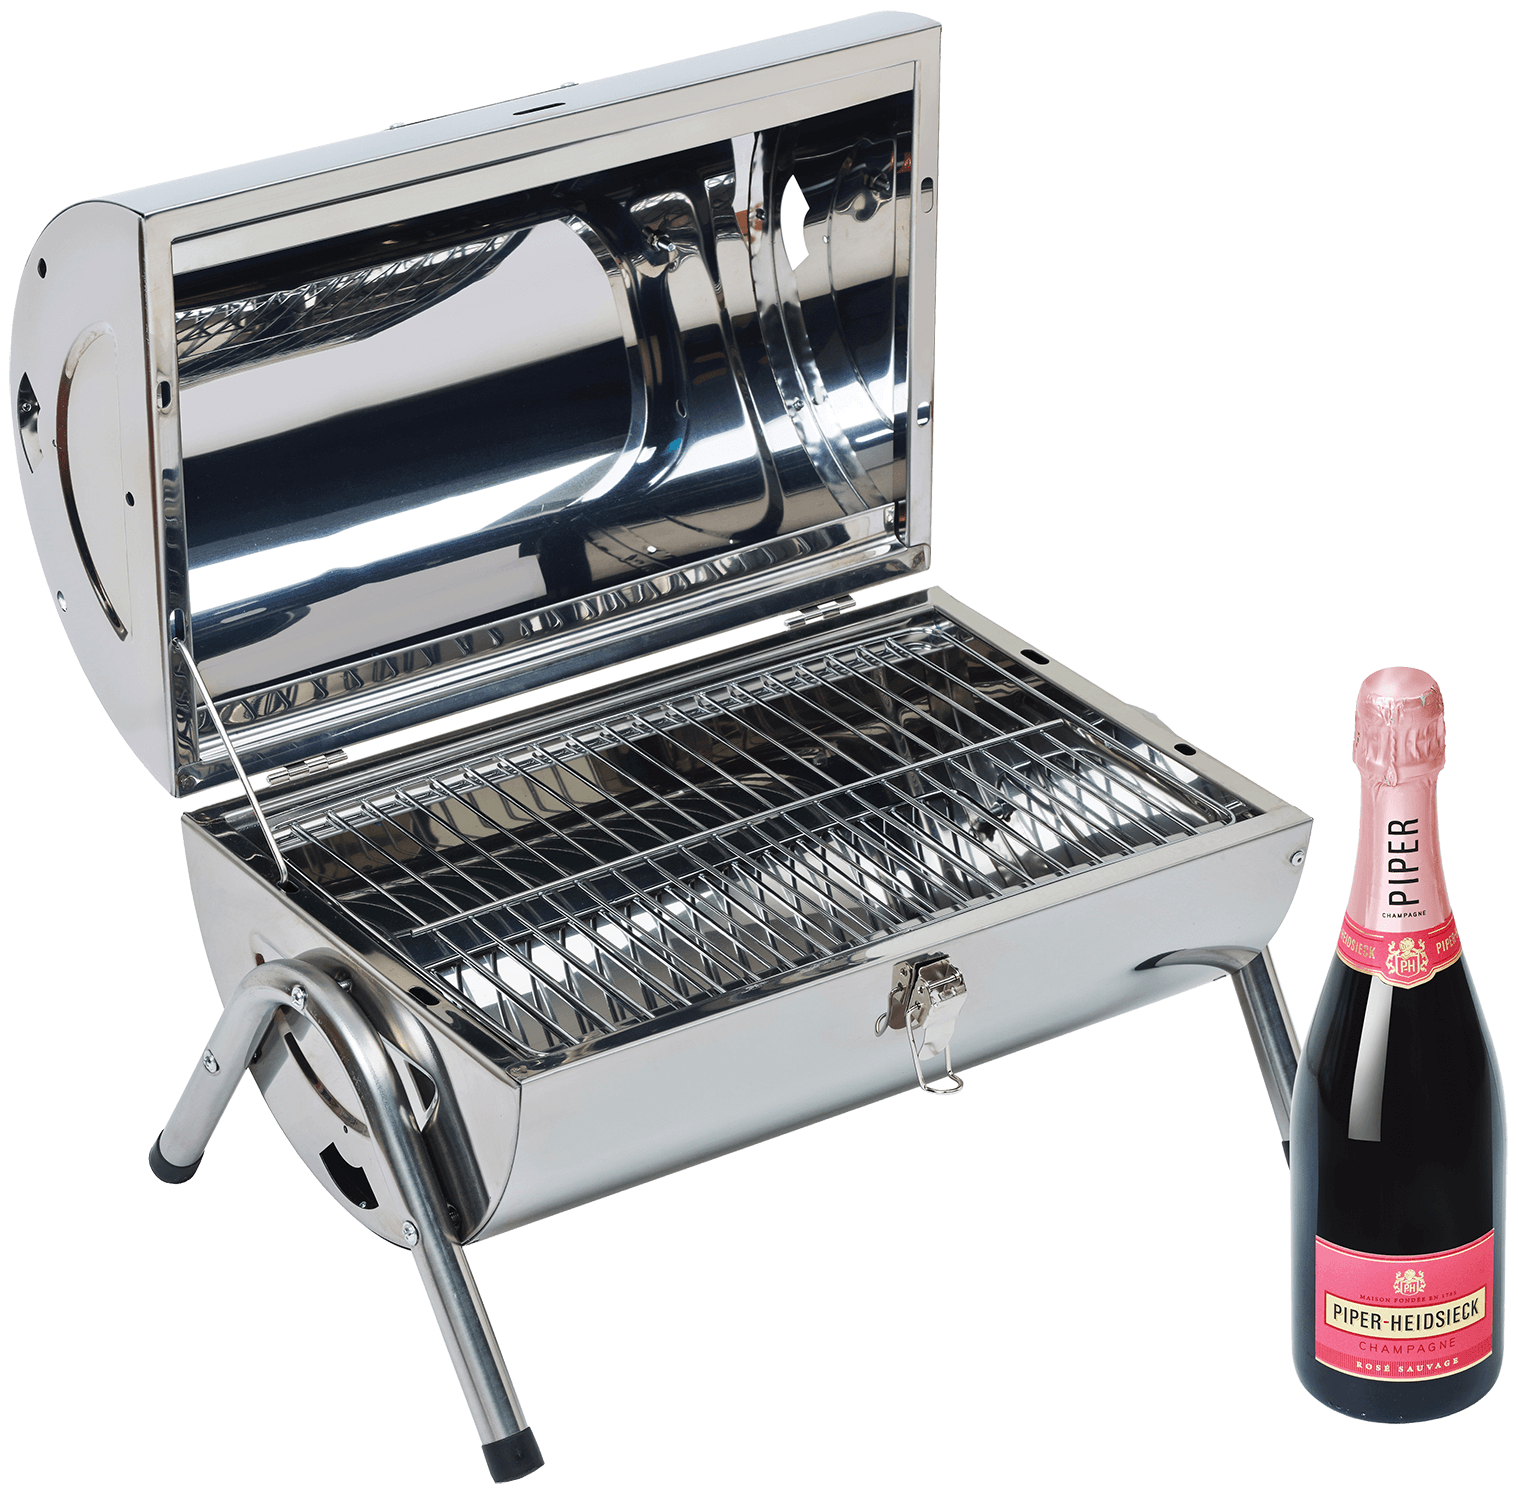 Piper-Heidsieck Sauvage Rose Brut Champagne AOC (gift box BBQ) piper heidsieck sauvage rose brut champagne aoc gift box bbq